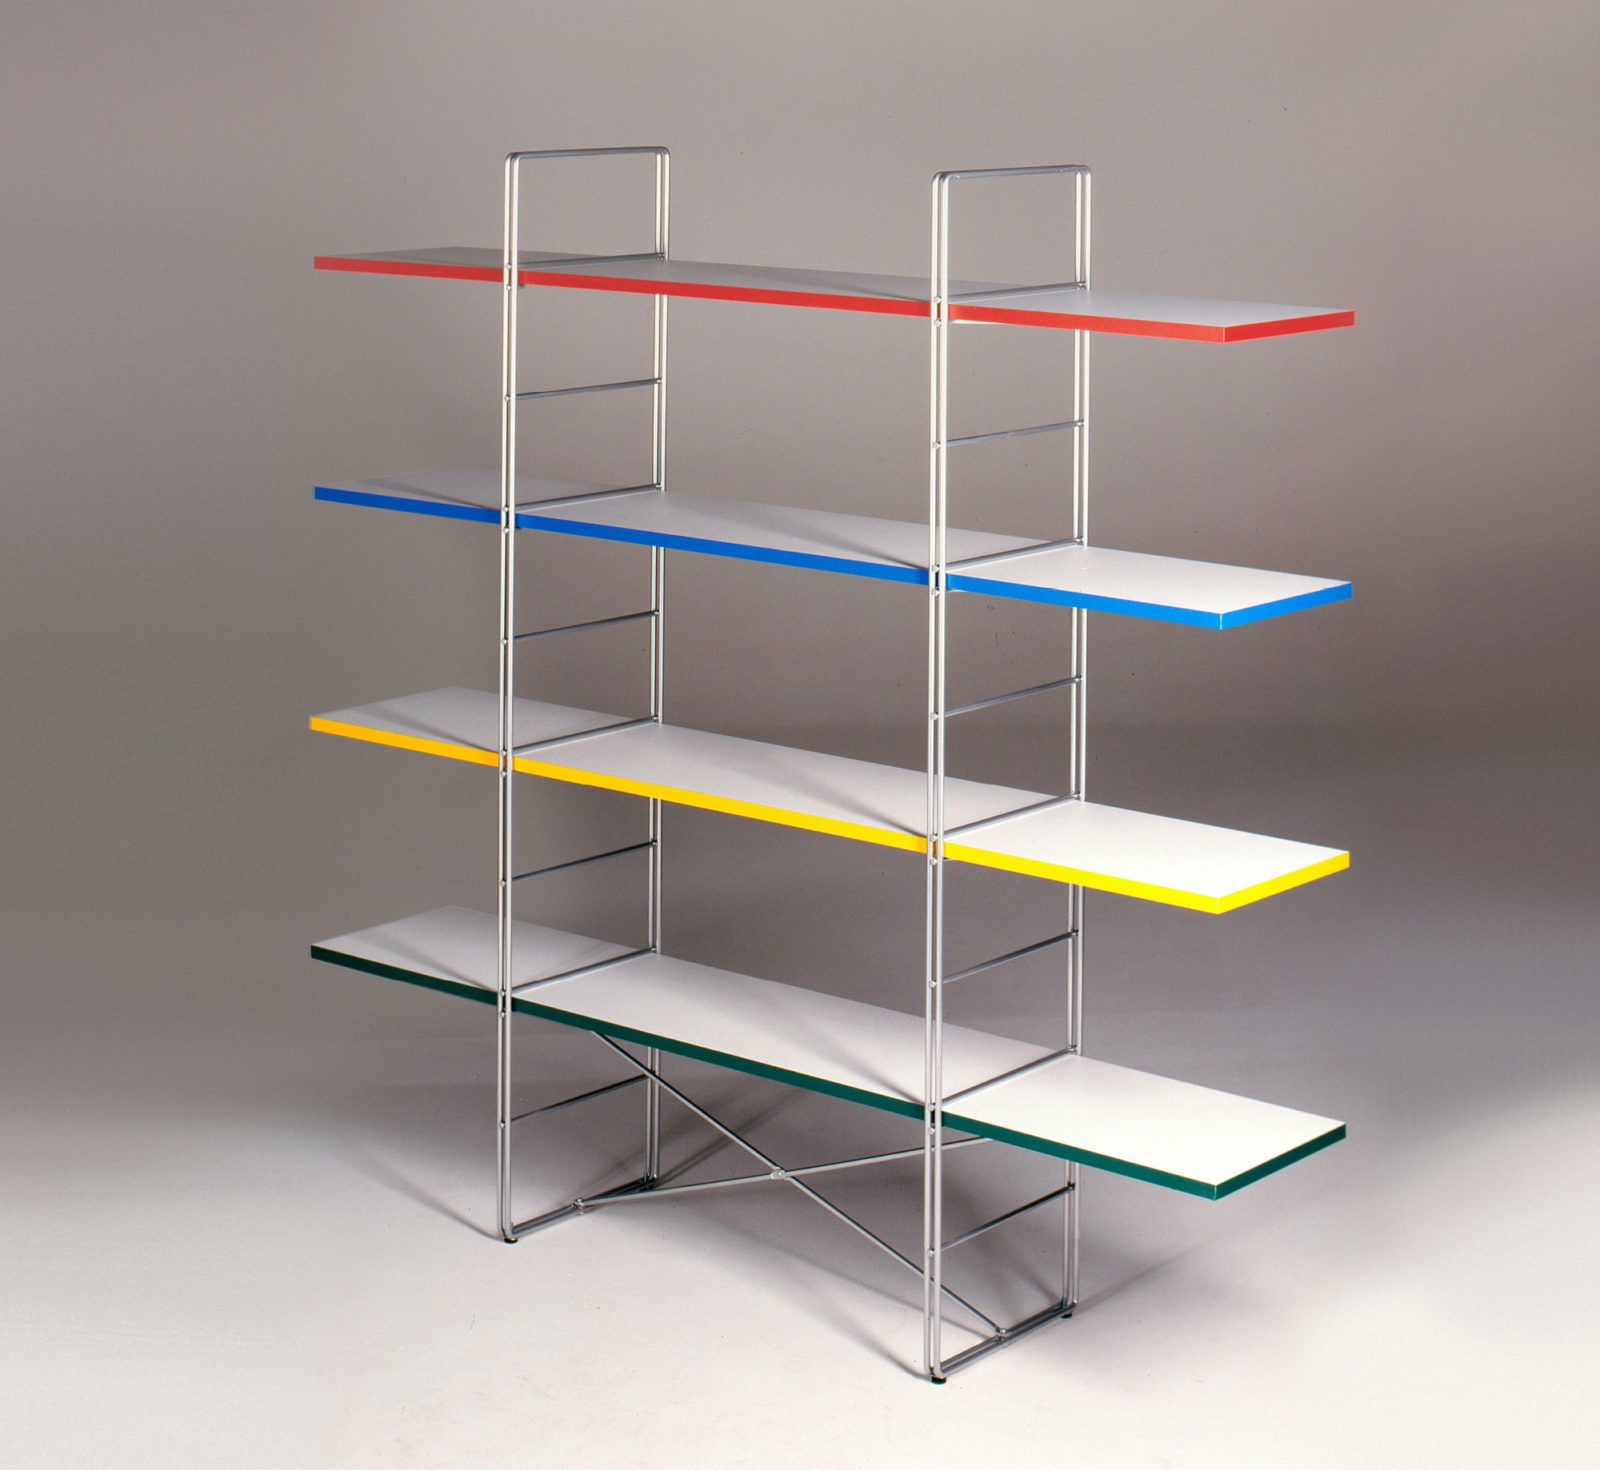 GUIDE shelving unit with wire sides with white shelves that have different coloured edges, red, blue, yellow and green.